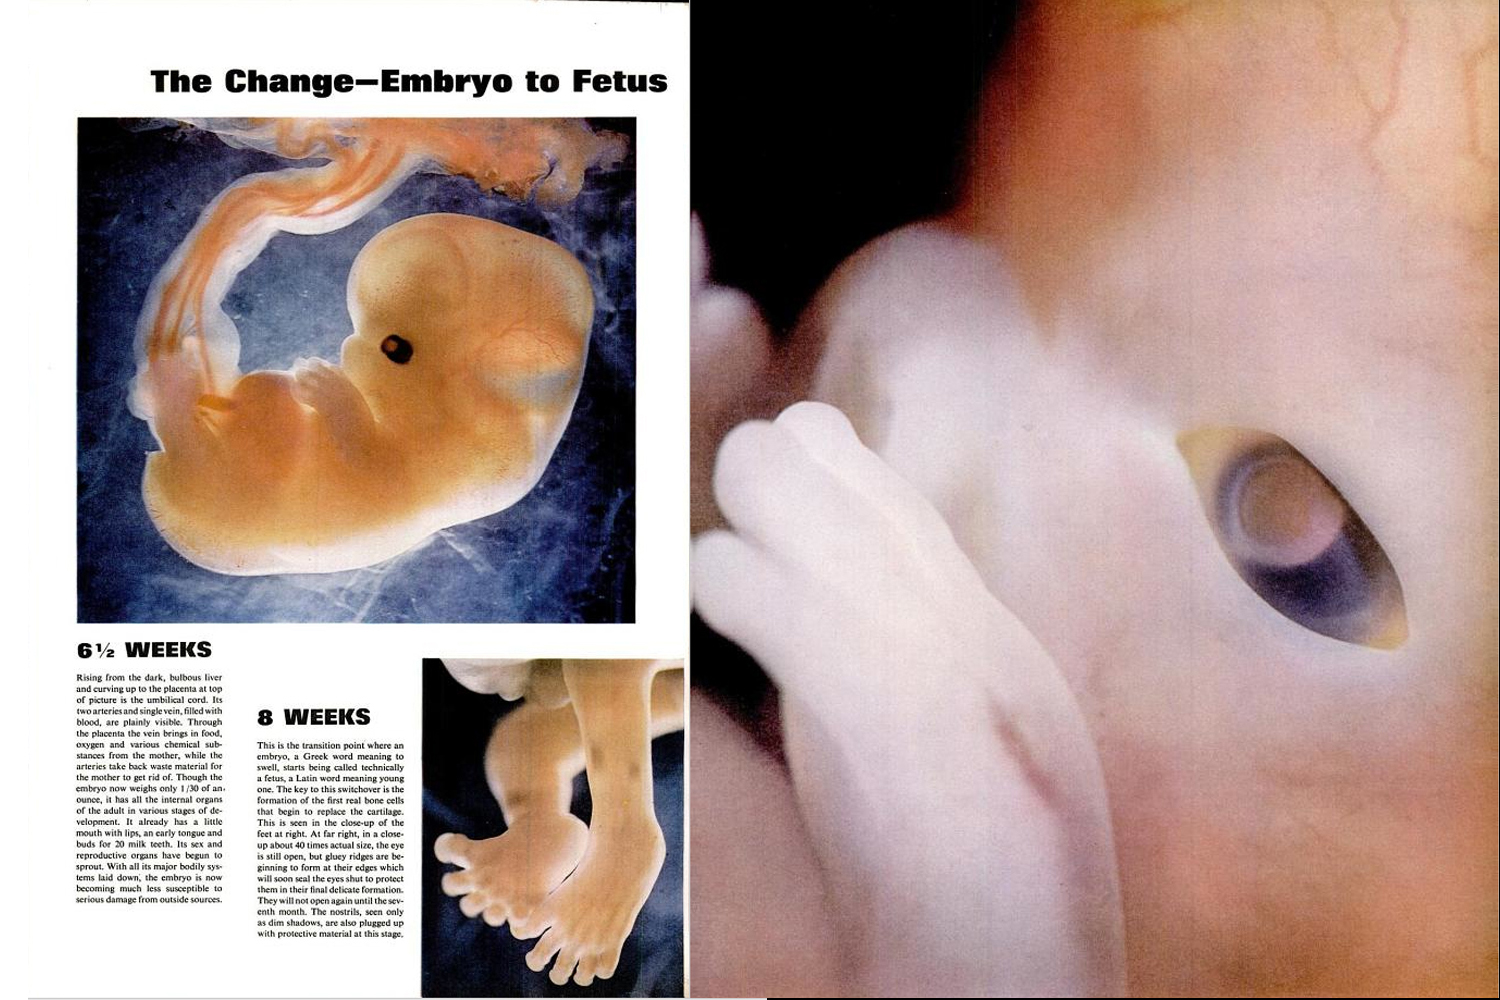 Page spreads from the Lennart Nilsson photo essay, "Drama of Life Before Birth," in the April 30, 1965, issue of LIFE magazine.